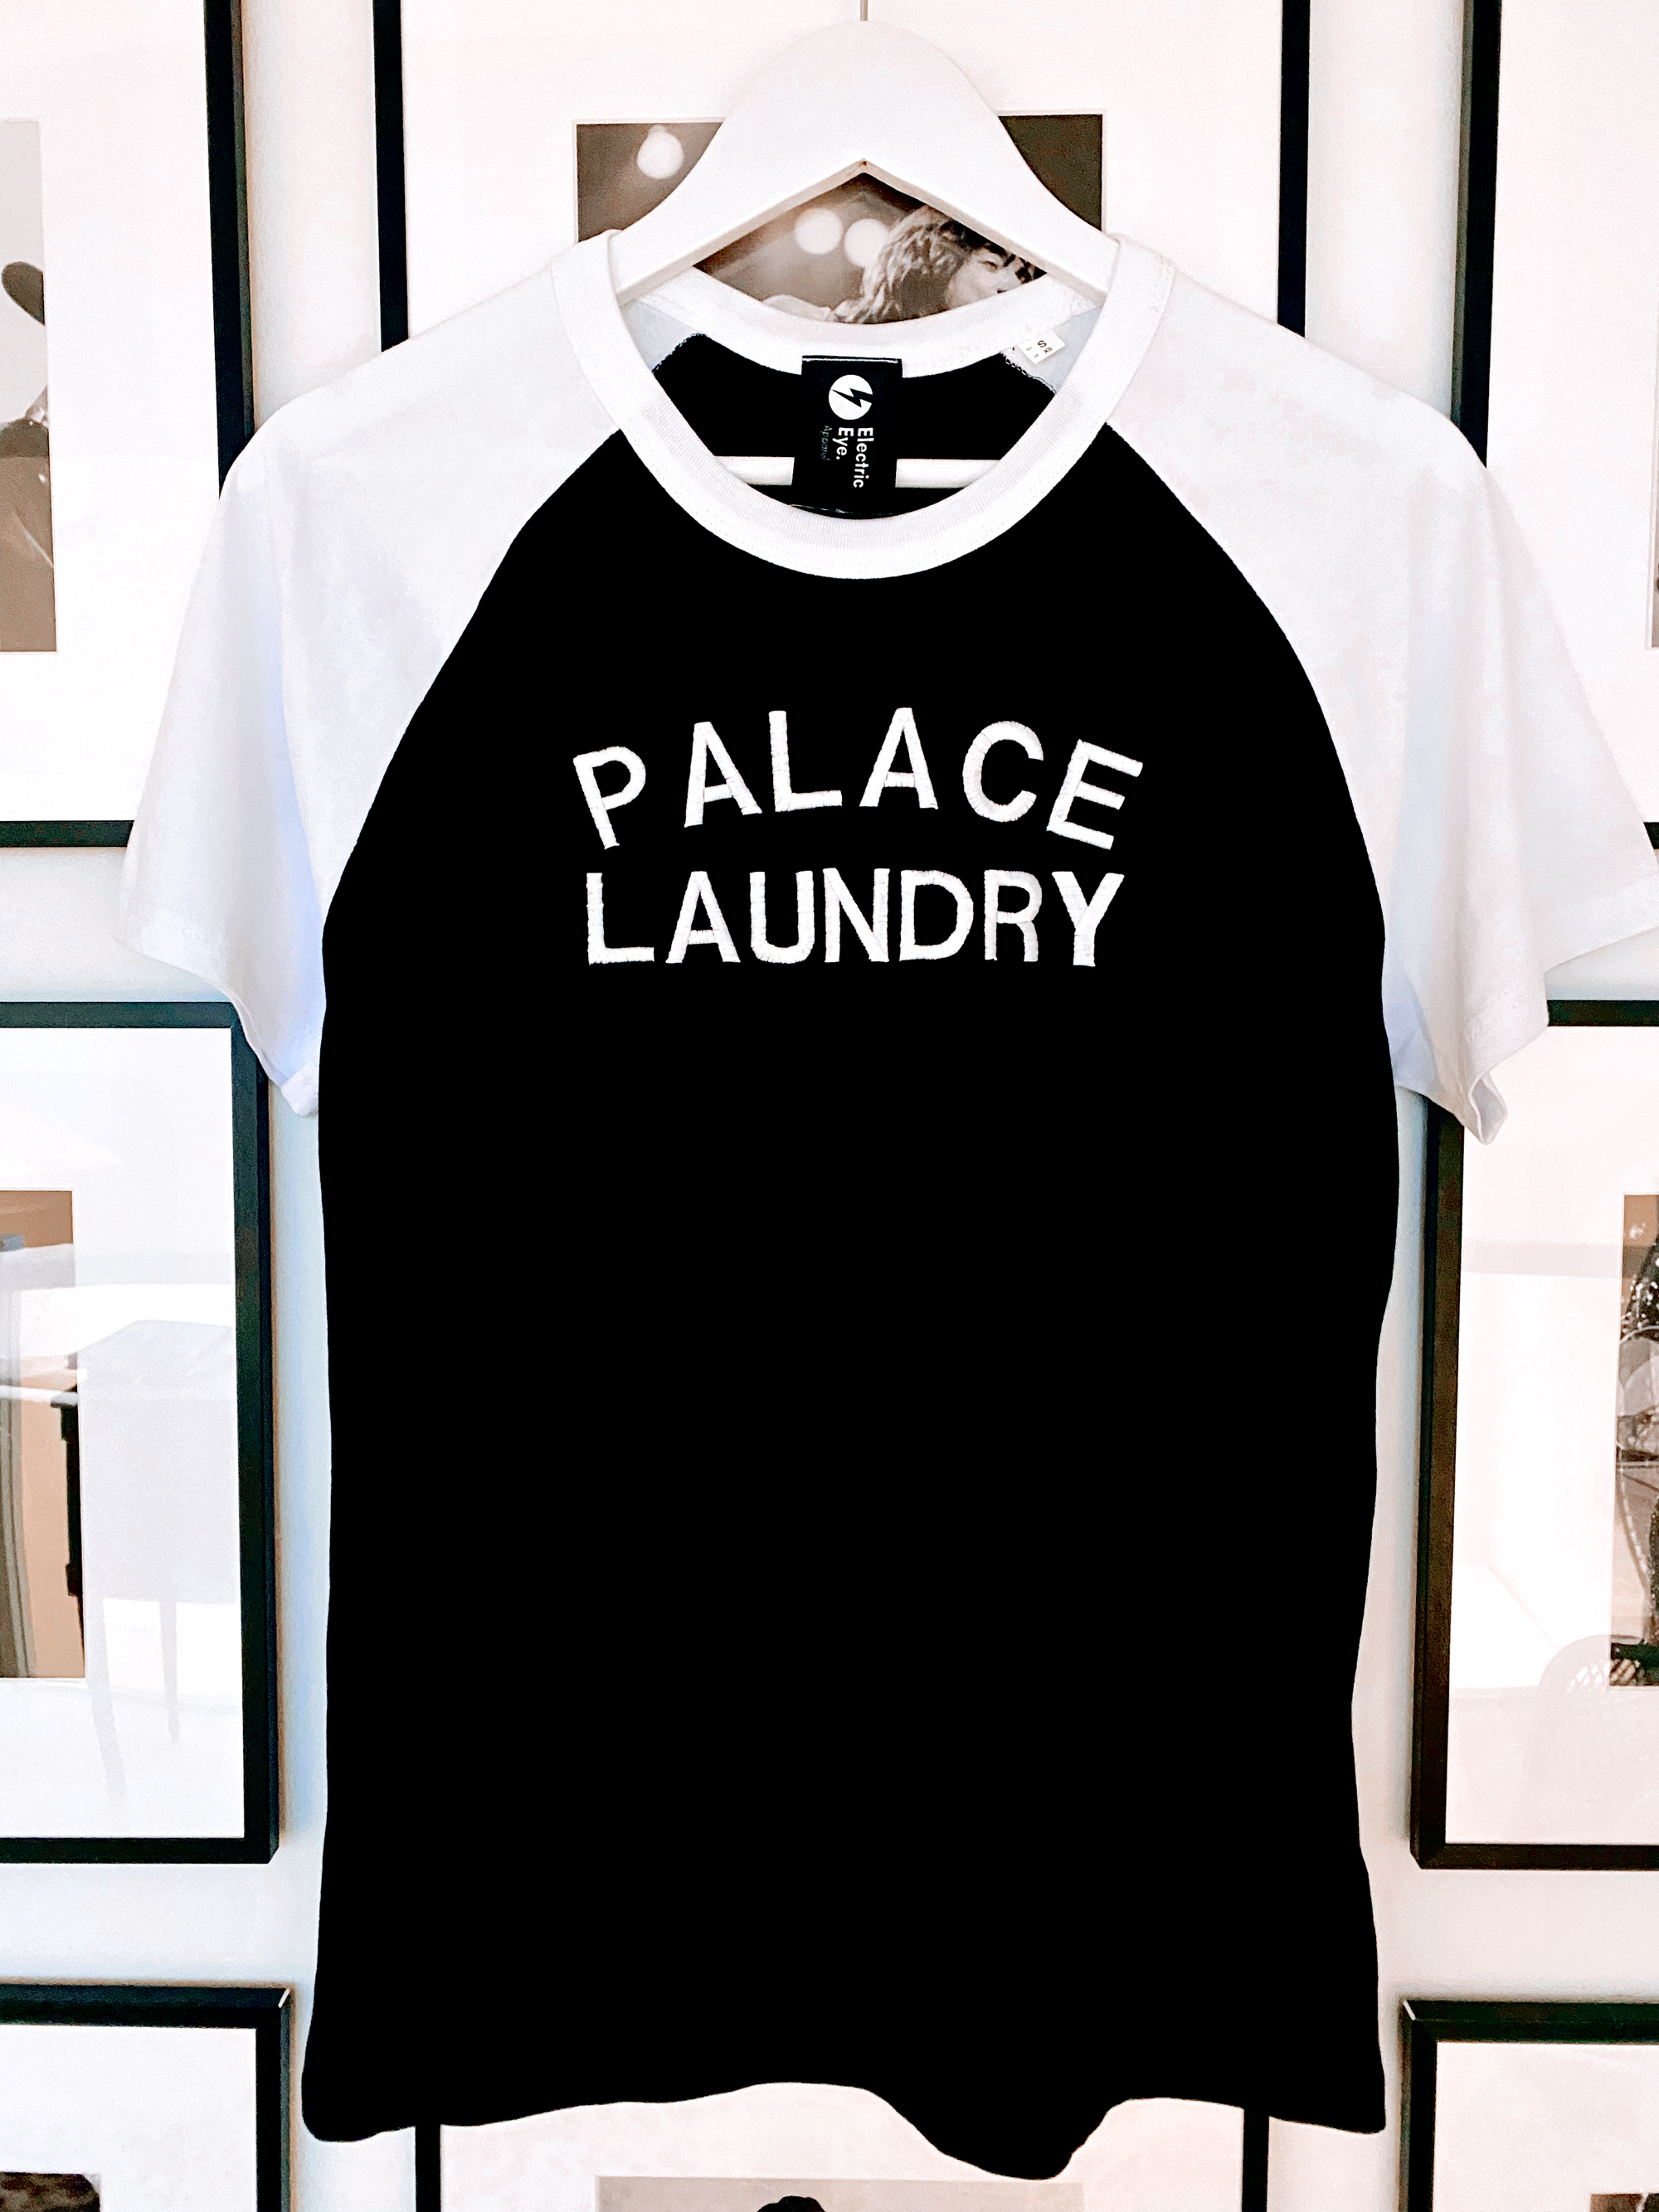 SAMPLE SALE ‘PALACE LAUNDRY’ EMBROIDERED UNISEX VINTAGE STYLE RAGLAN T-SHIRT (inspired by Mick Jagger) (SIZE XXS)